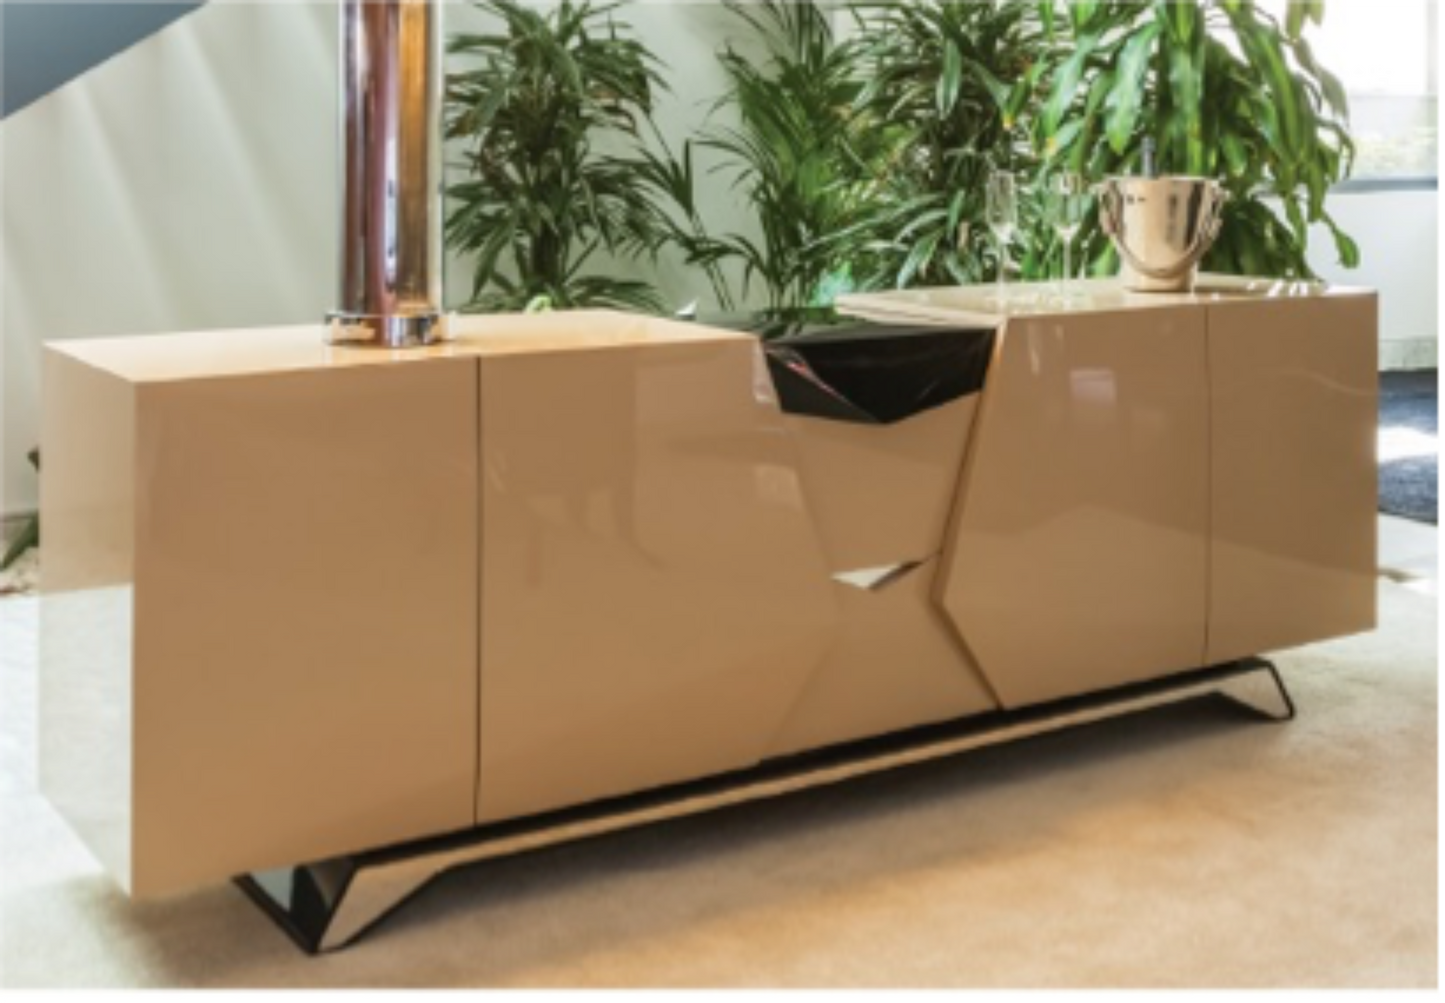 Luxury sideboard in gloss beige wood with built in cutlery drawers